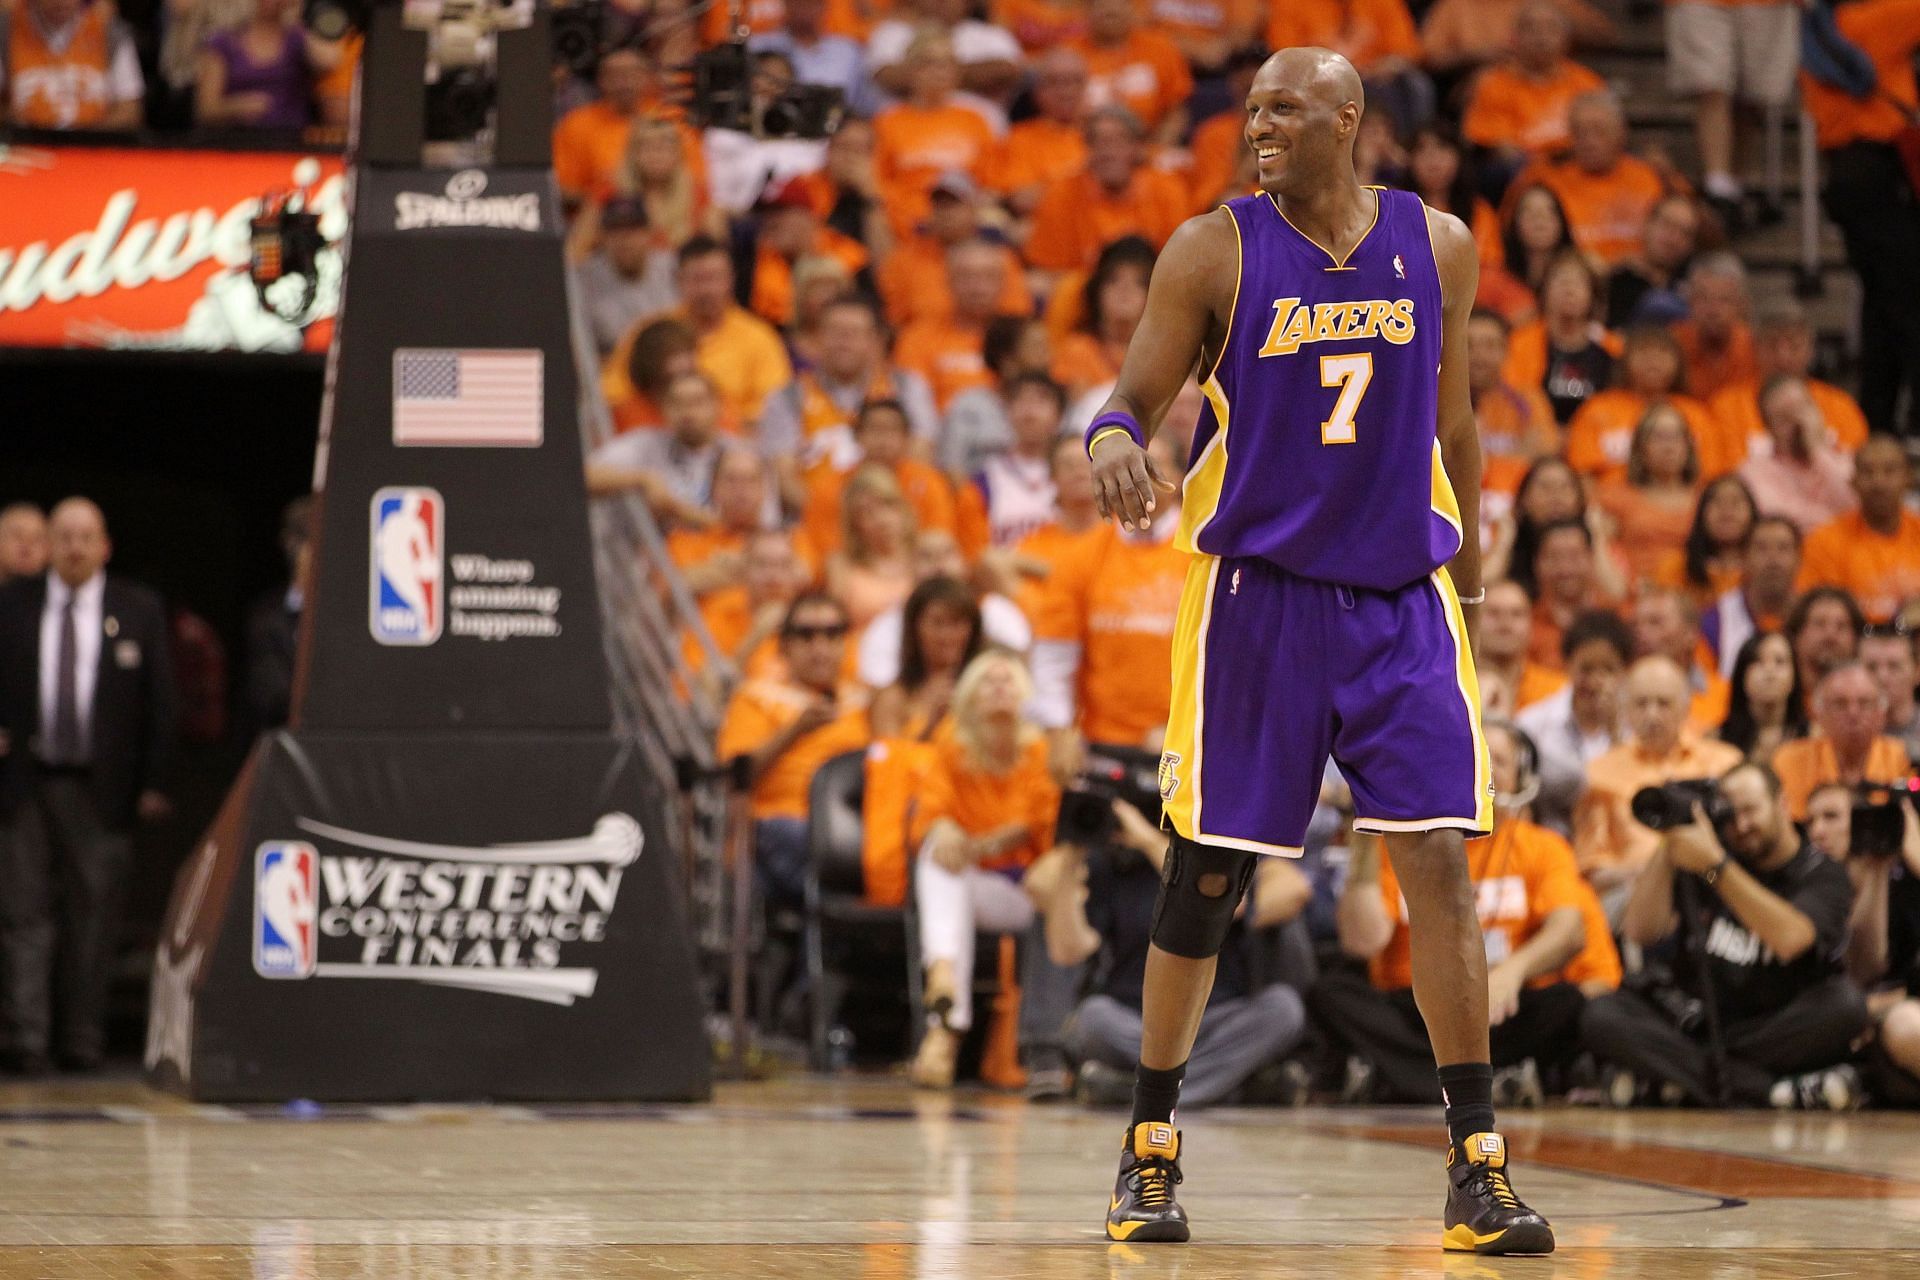 Lamar Odom was driving under the influence in 2013 (Image via Getty Images)